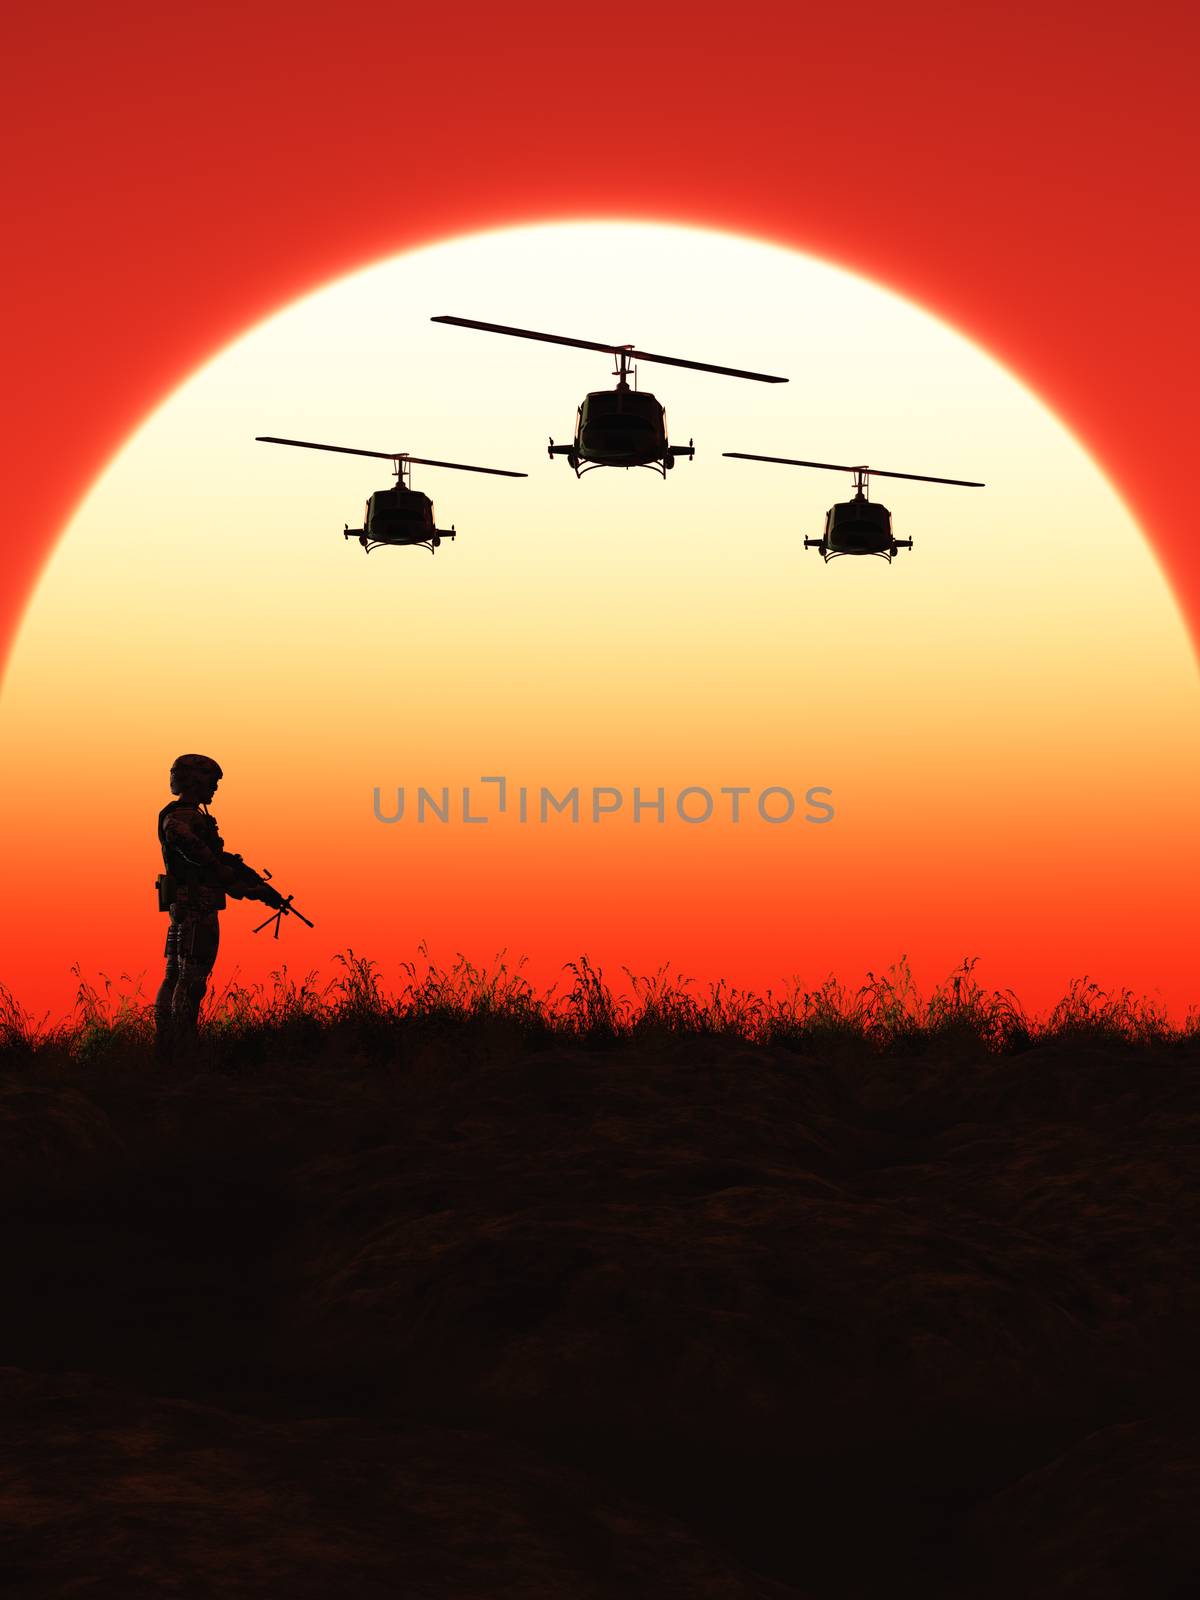 This image shows a soldier in the sunset with flying helicopter